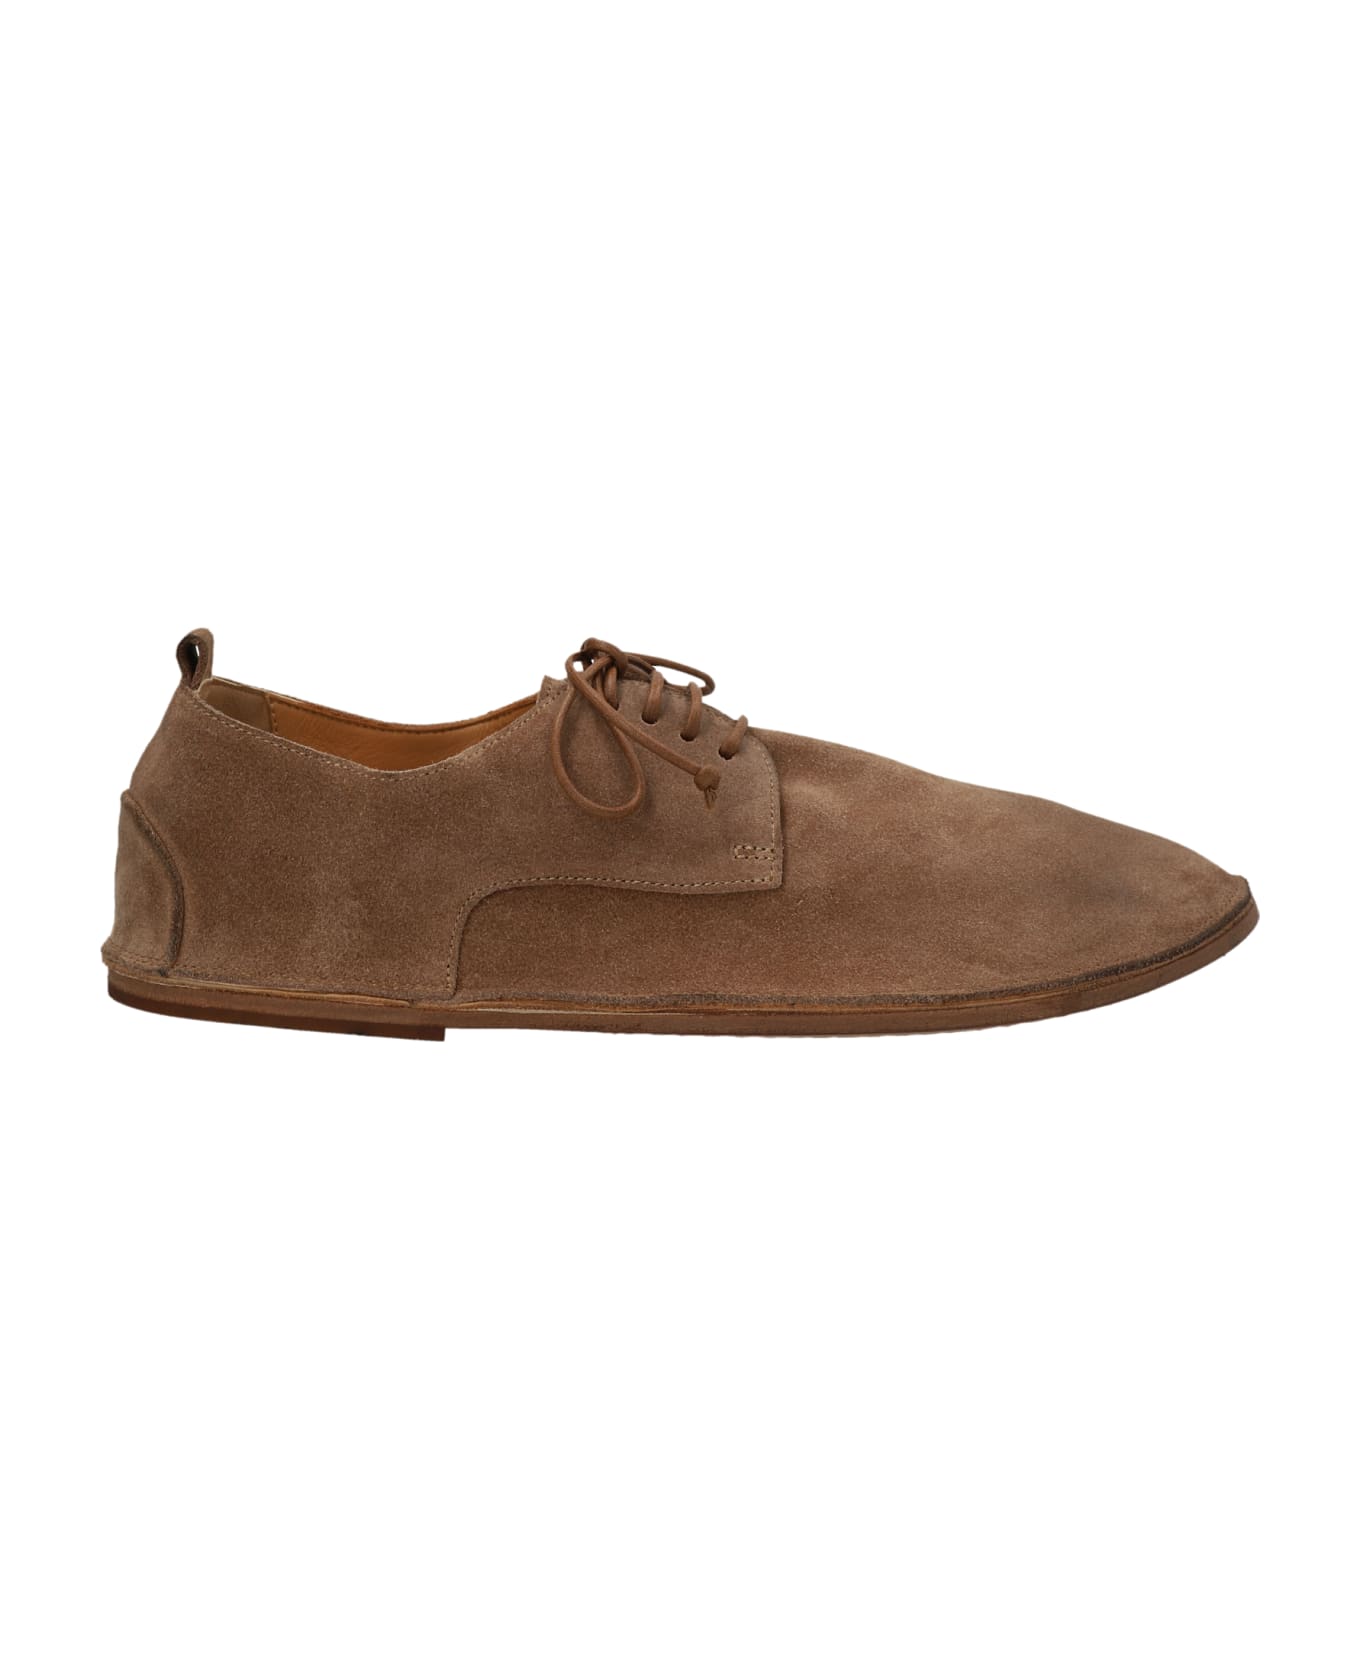 Marsell 'strasacco' Derby Shoes - Beige